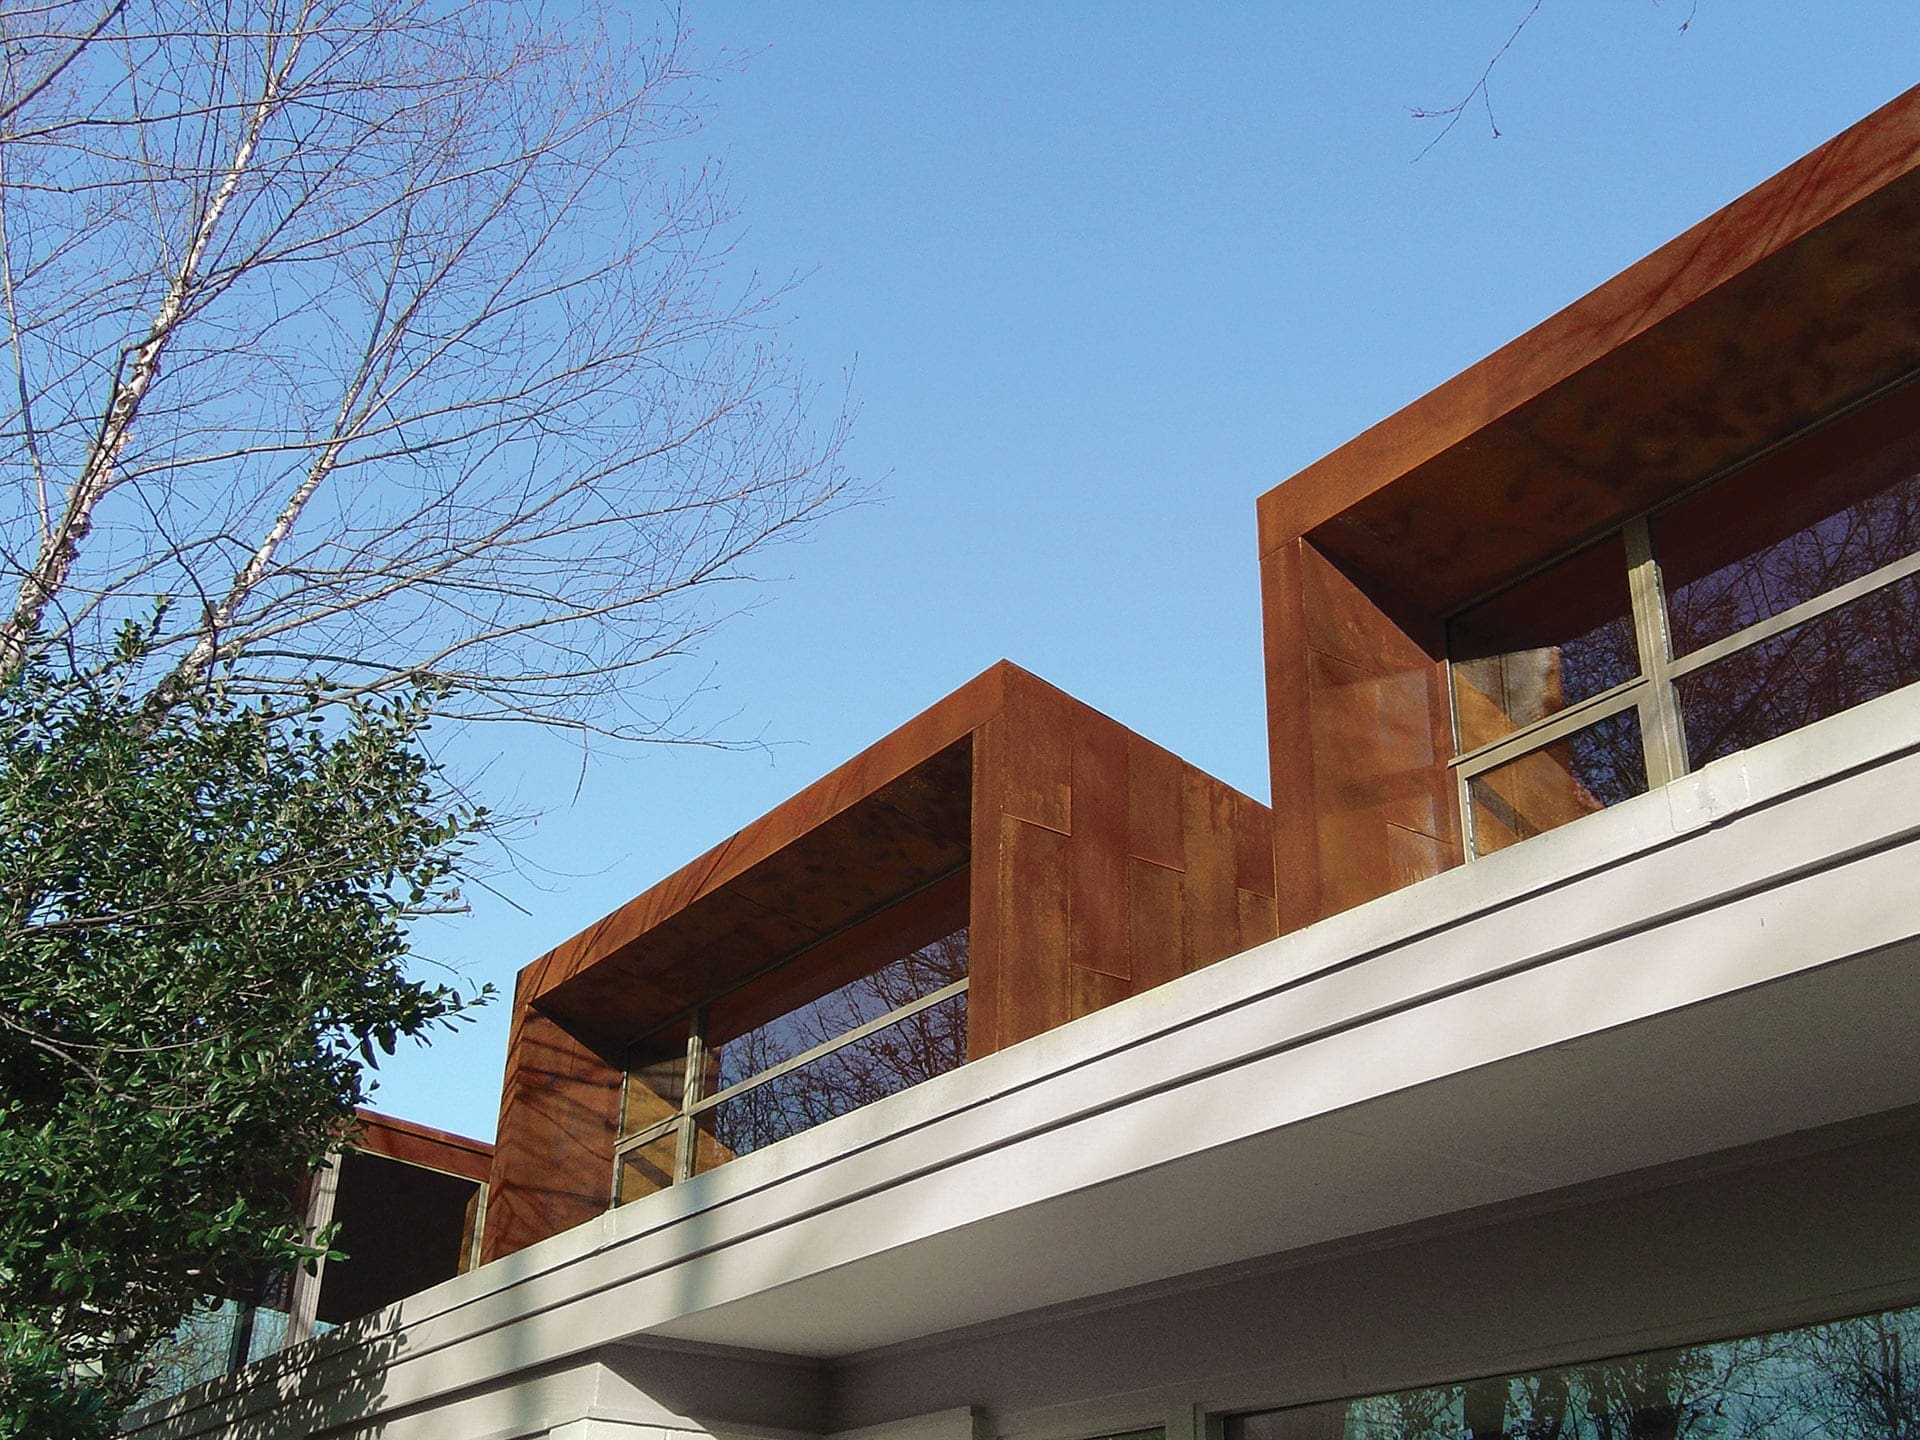 Details of the Solanum Steel exterior cladding on the Arkansas House.